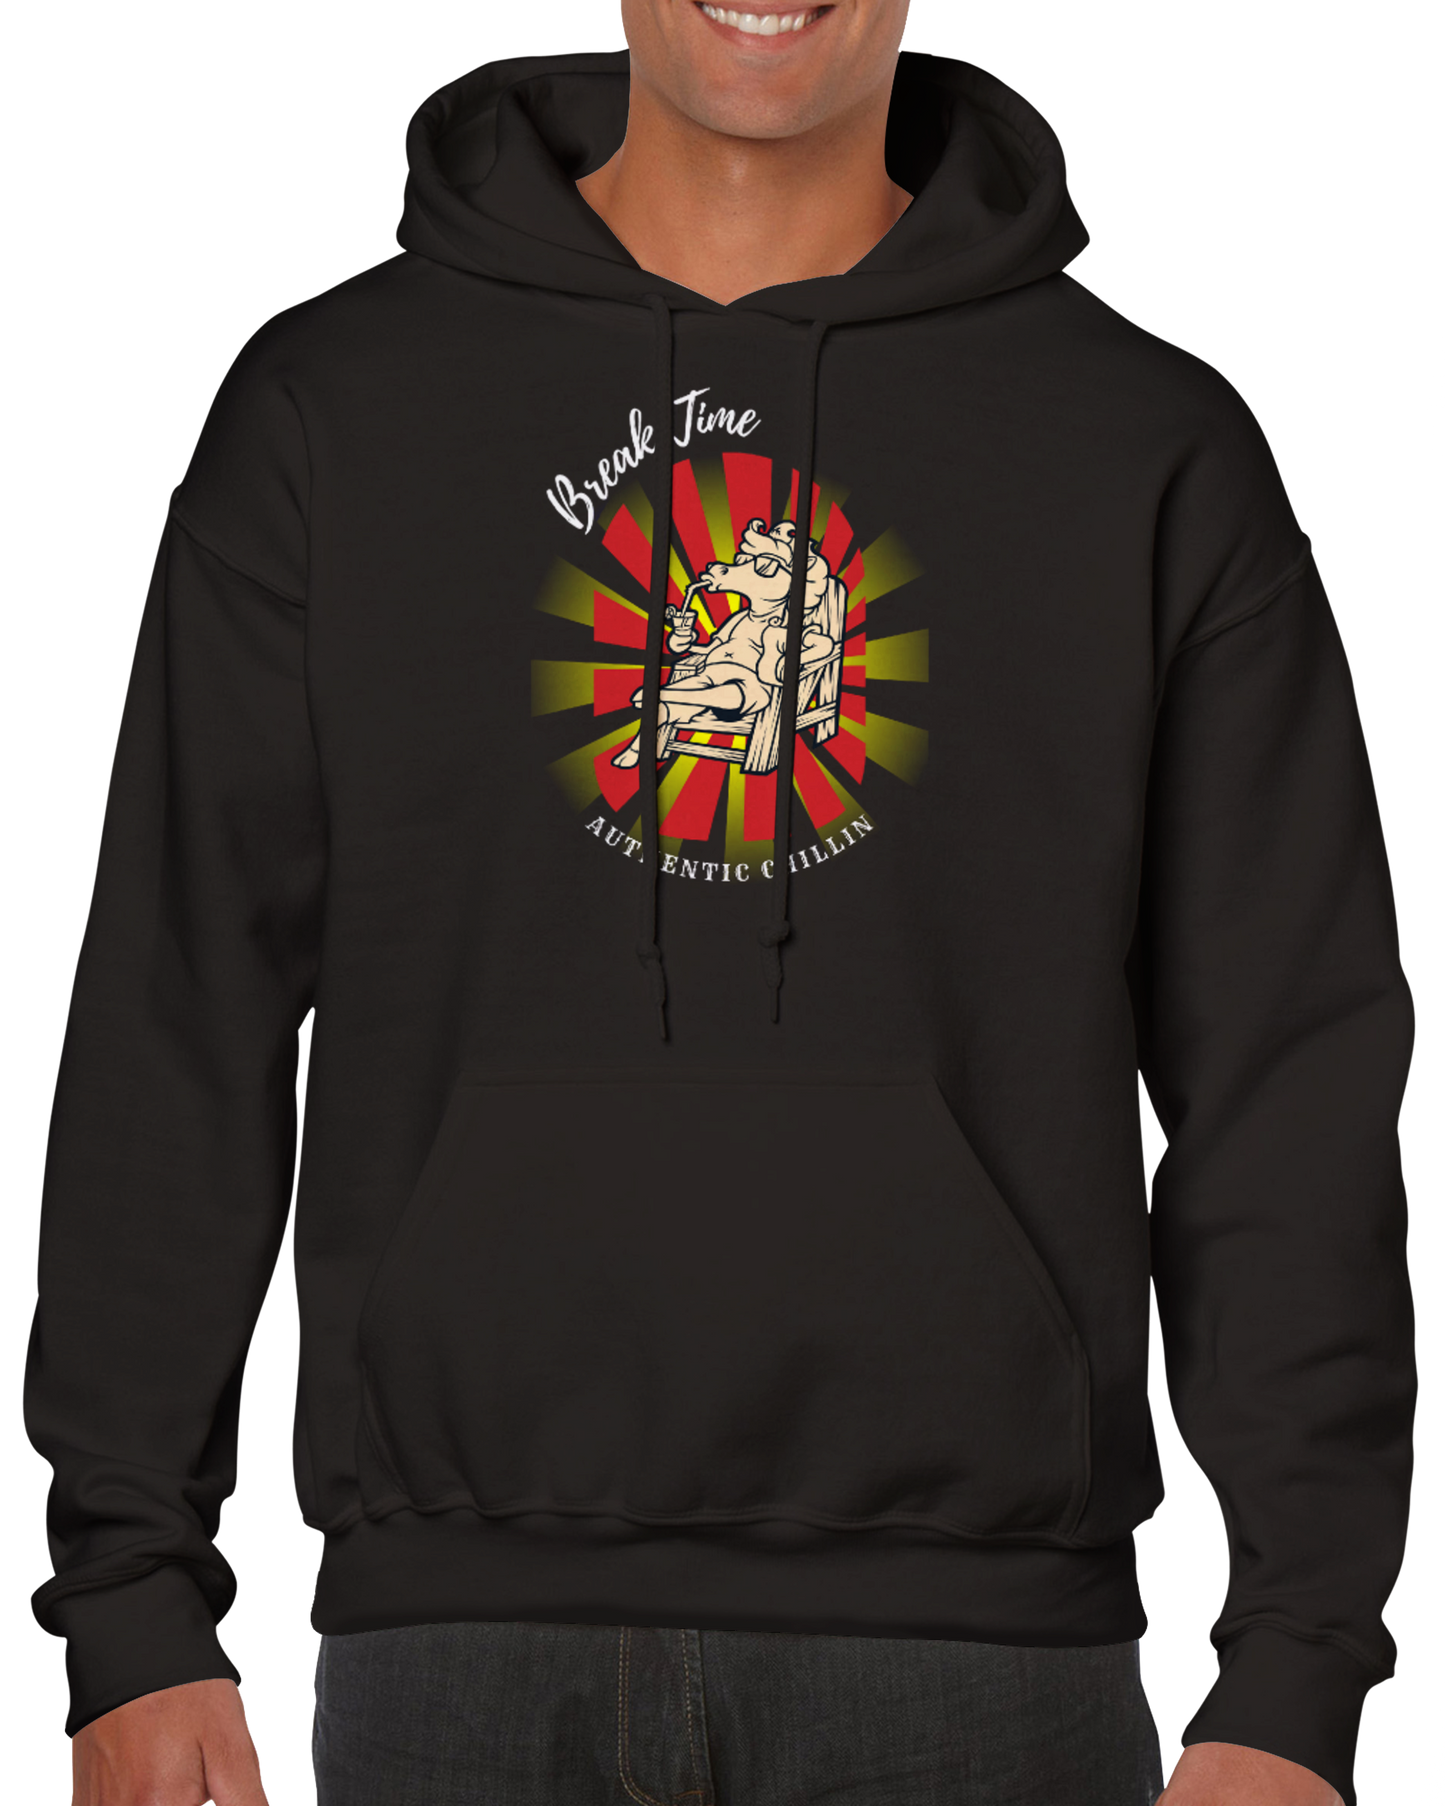 Hand Drawn Horse || Unisex Hoodie - Design: "BREAKTIME''; Static Design; Personalizable Back Text